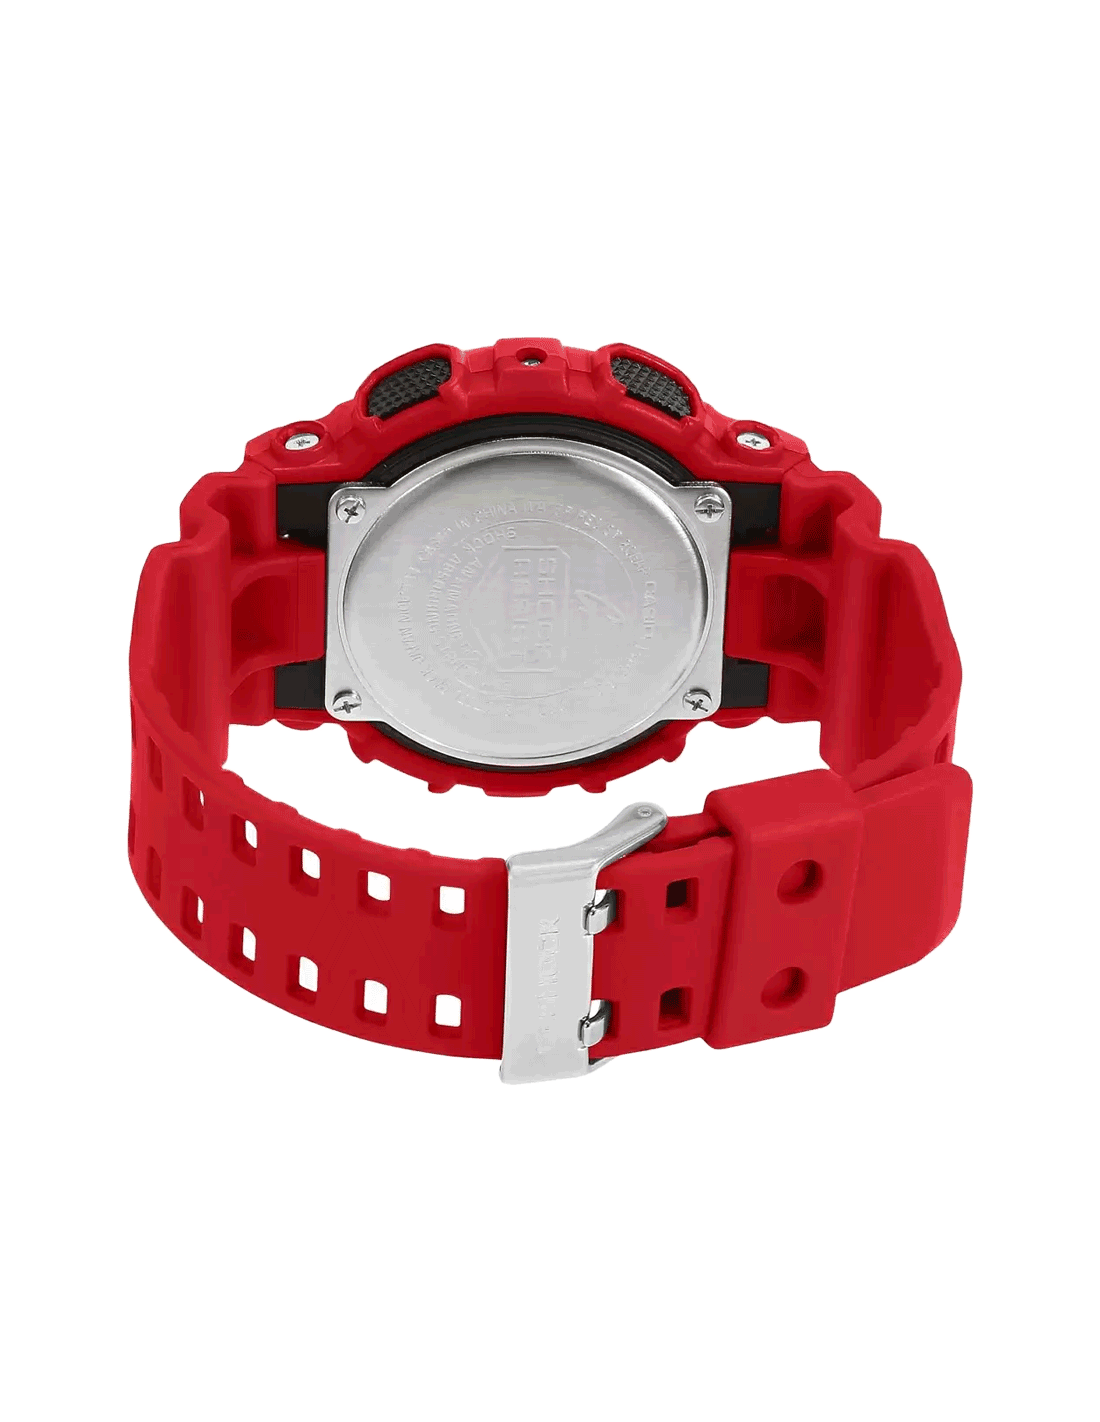 Casio G-Shock Analog-Digital Watch Latest Model With Amazing Features Red Belt And Black Digital Dial BTGA-100B-4A